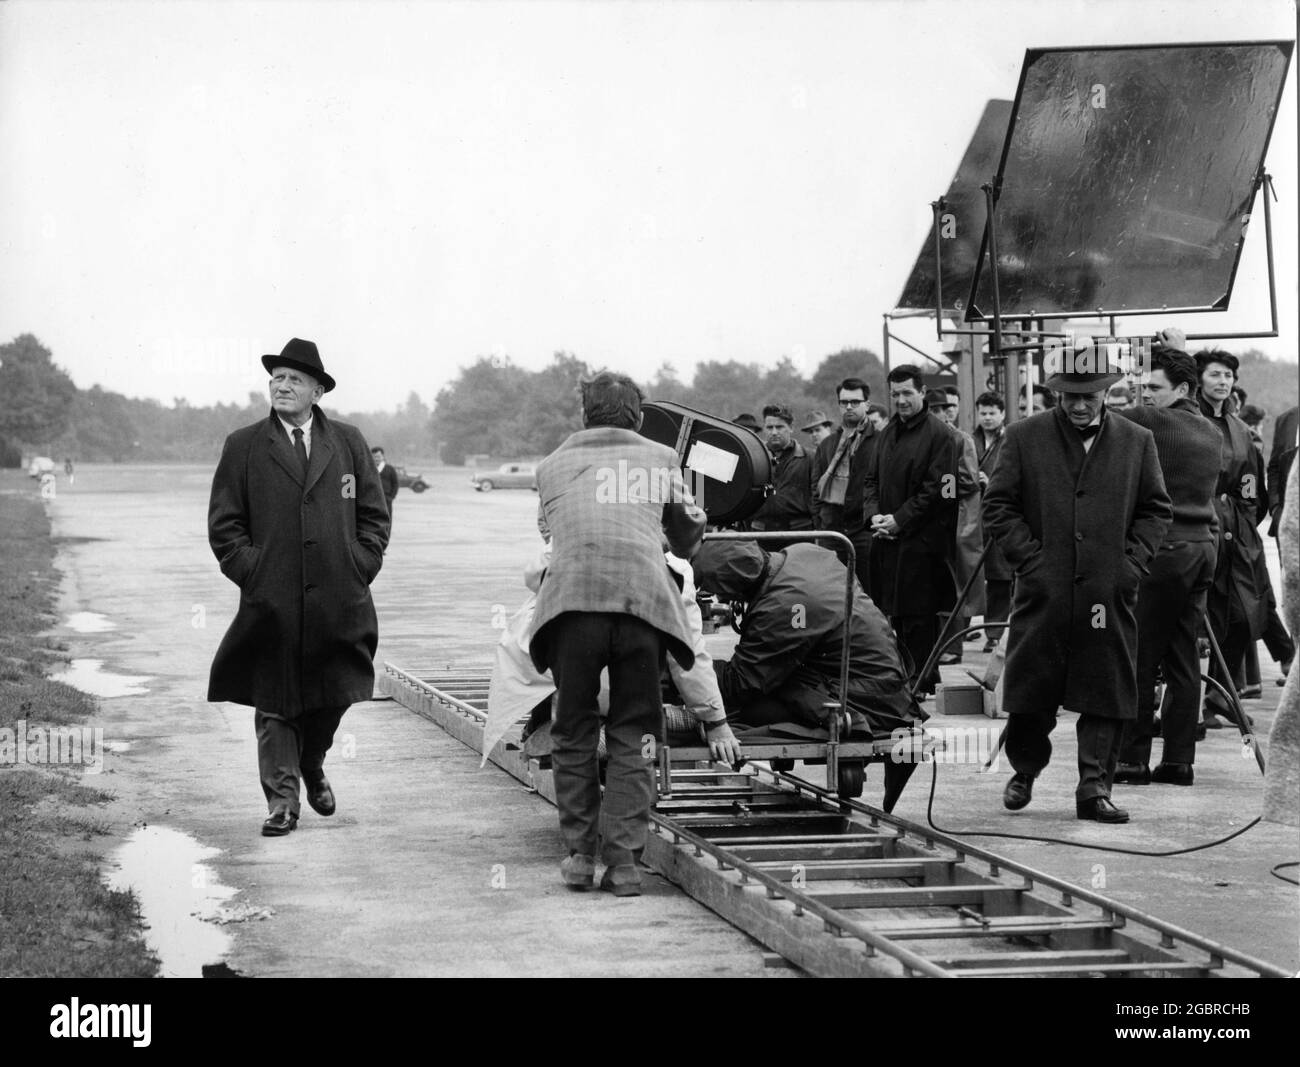 SPENCER TRACY as Chief Judge Dan Haywood walks around the old Nuremberg Nazi Rally Site on set location candid with Director STANLEY KRAMER  (walking with hat and overcoat) and Movie Crew during filming of JUDGEMENT AT NUREMBERG 1961 director STANLEY KRAMER based on original story by Abby Mann cinematography Ernest Laszlo music Ernest Gold Roxlom Films Inc. / United Artists Stock Photo